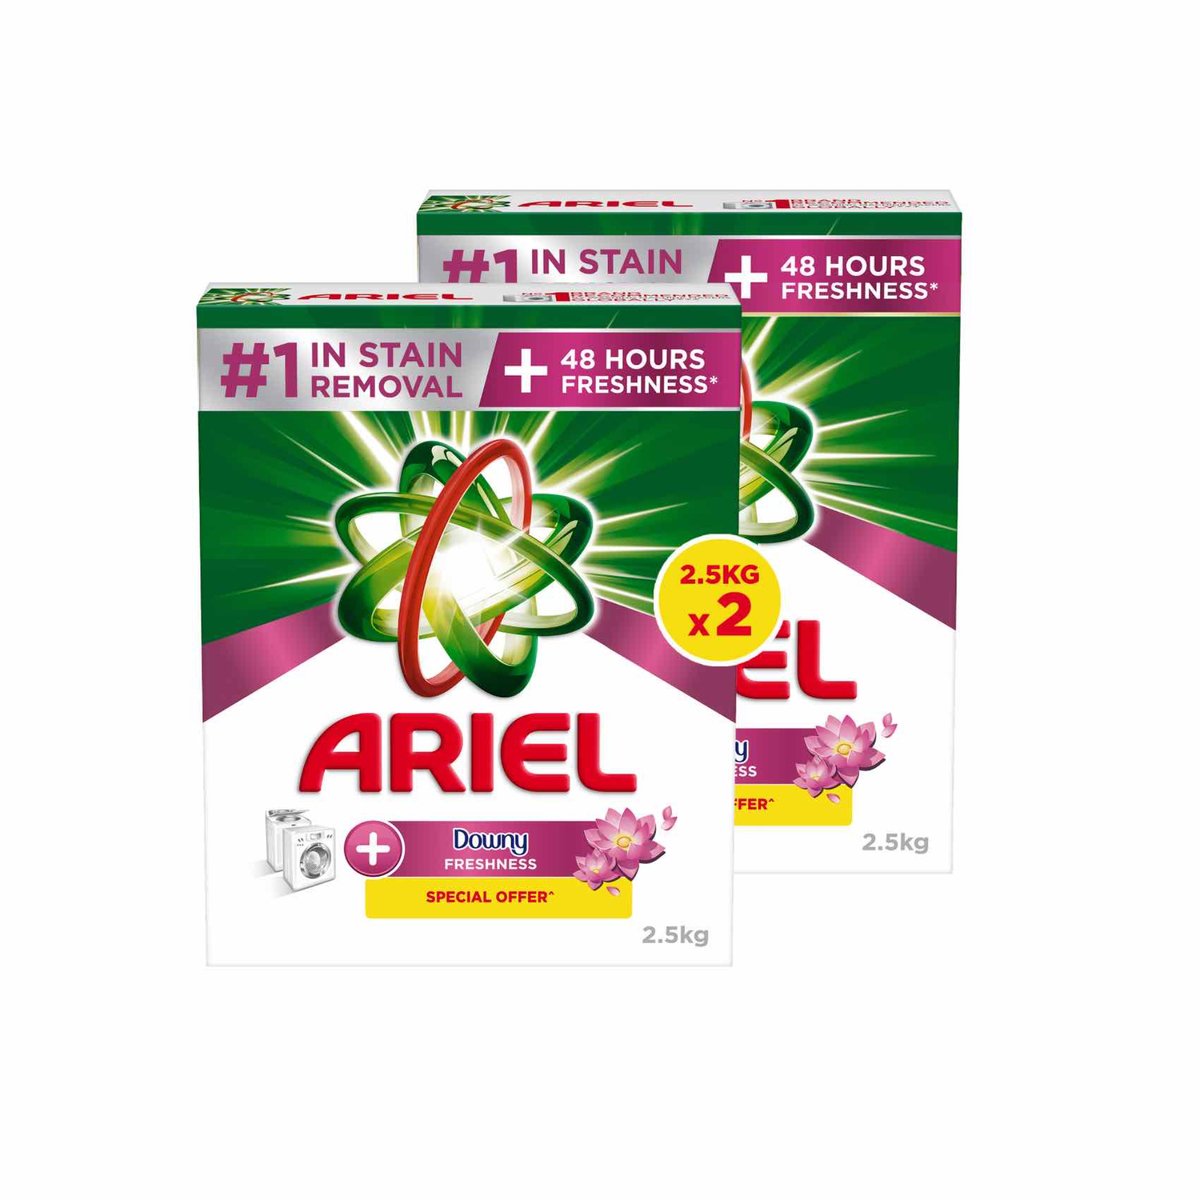 Buy Ariel Automatic Downy Fresh Laundry Detergent Powder, Number 1 in Stain Removal with 48 Hours of Freshness, 2 x 2.5 kg Online at Best Price | Front load washing powders | Lulu UAE in UAE